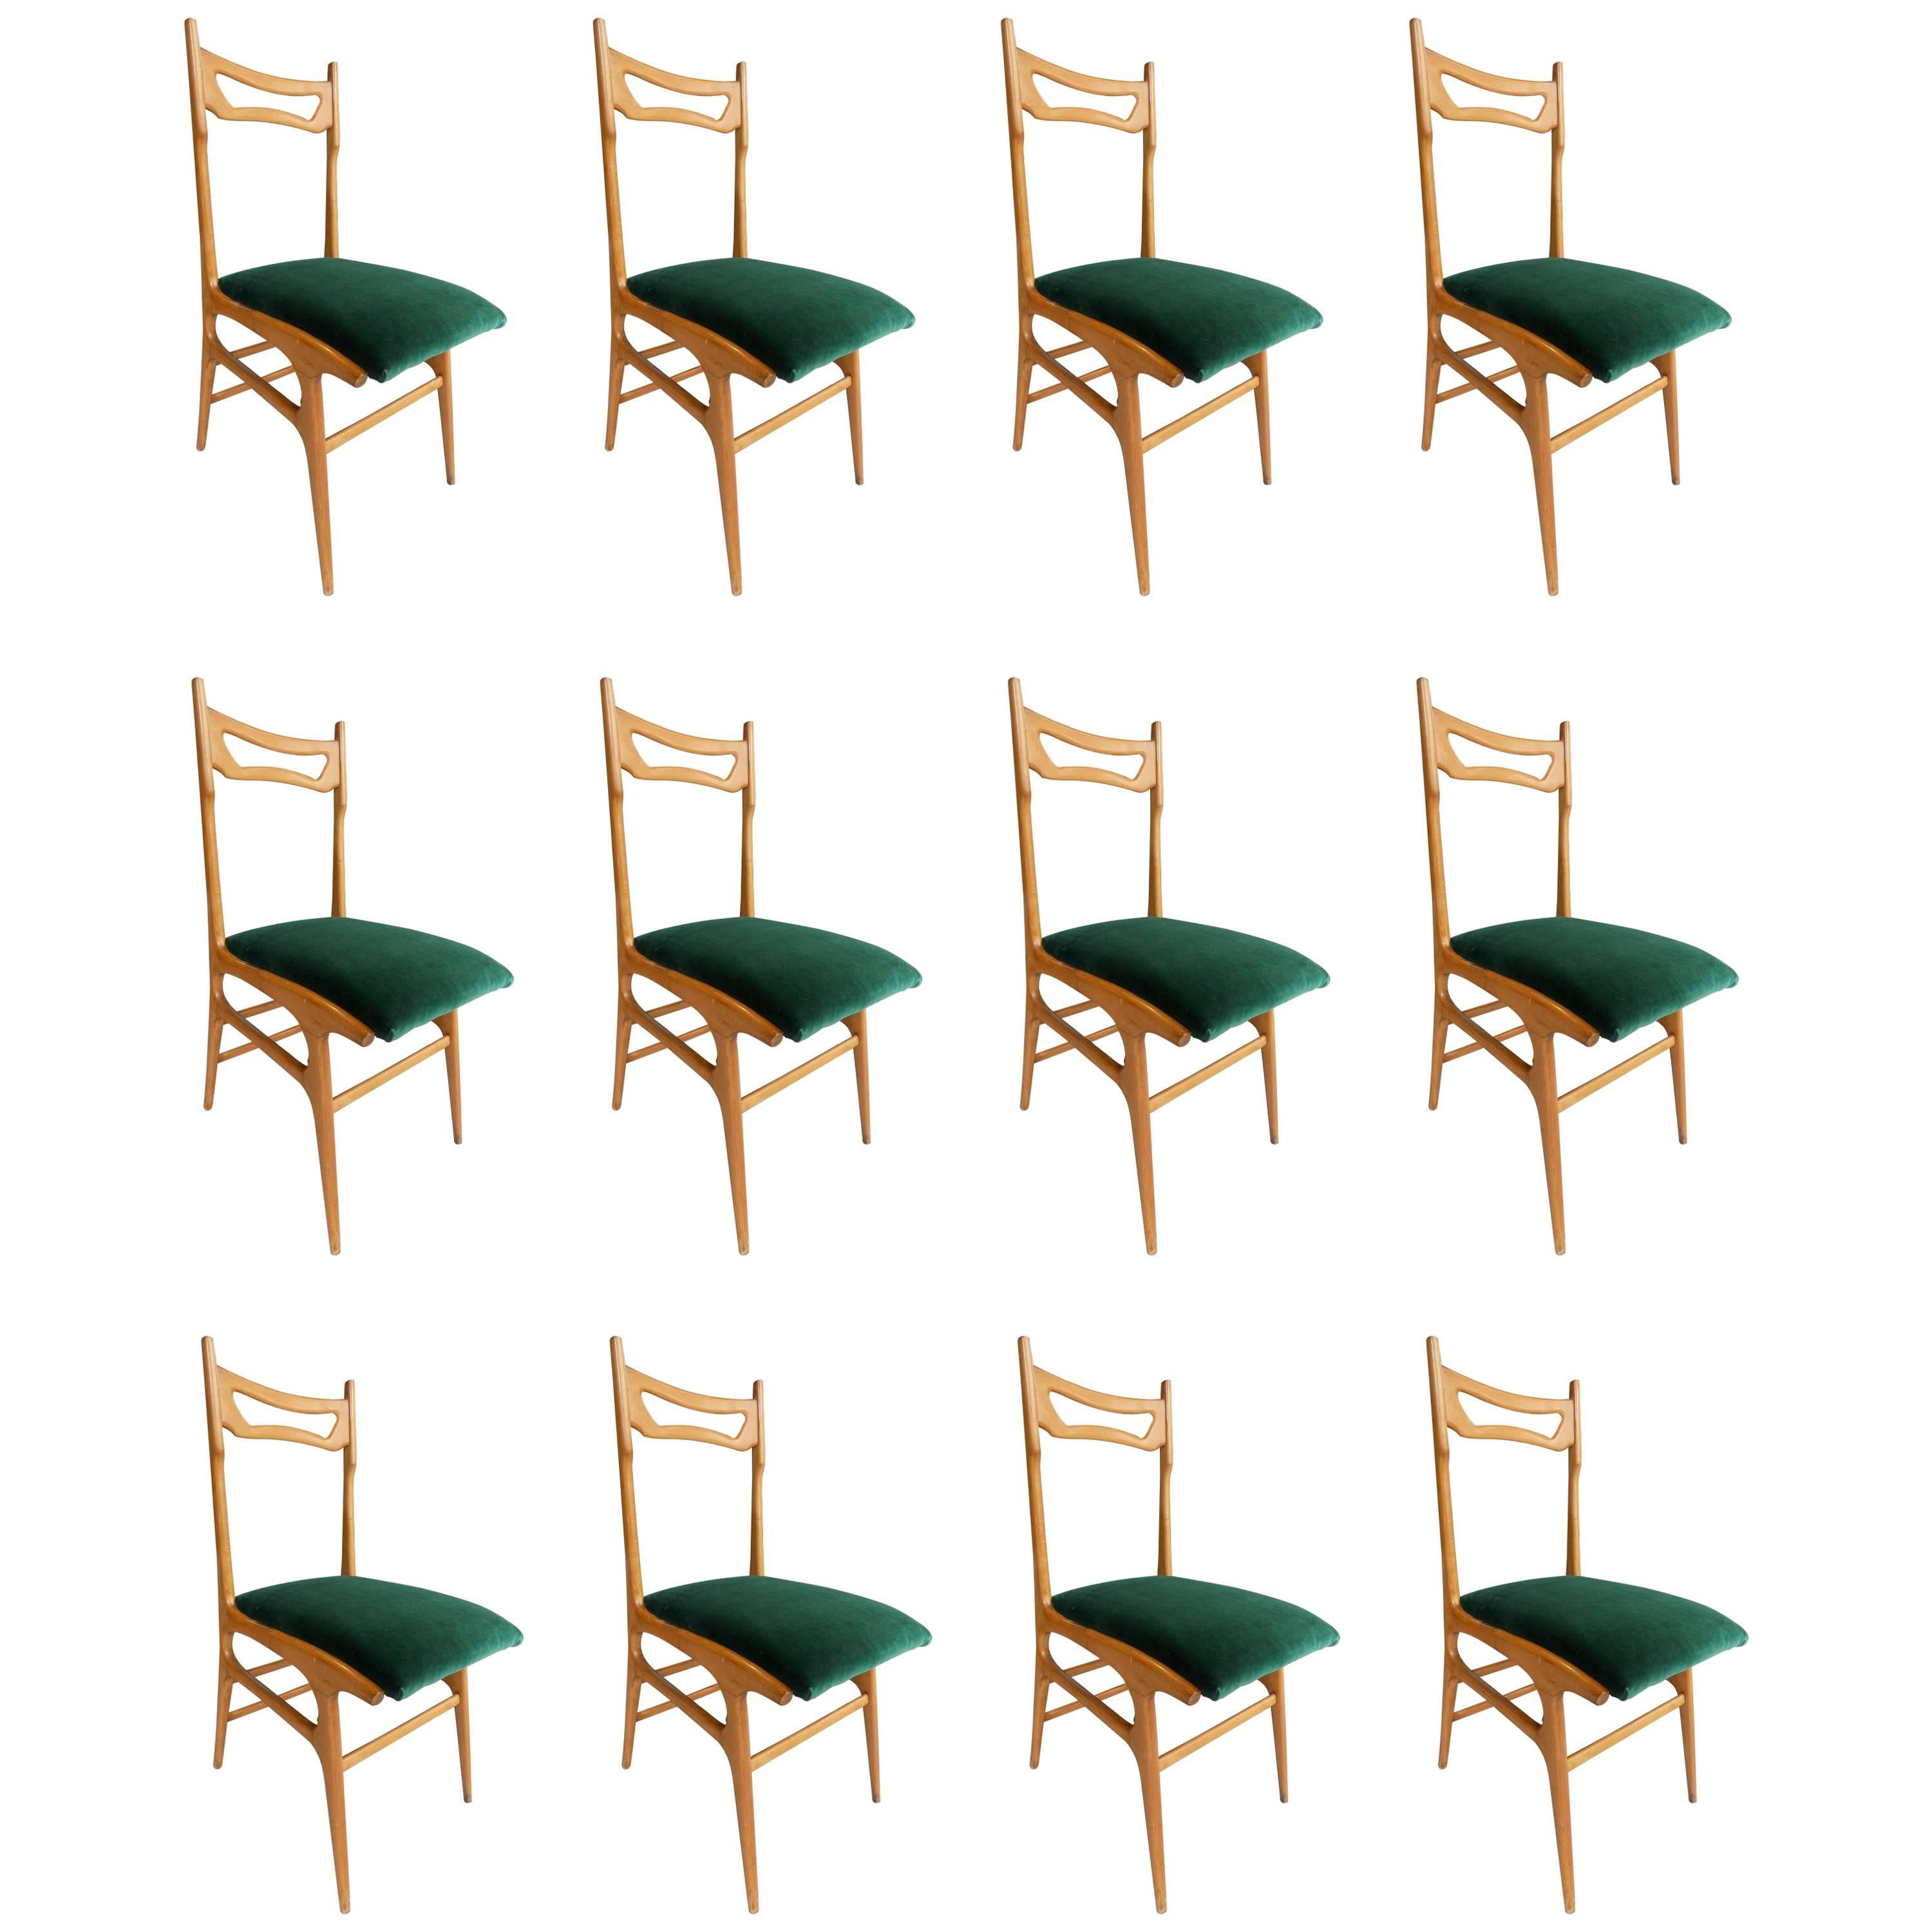 Fantastic Set of 12 Reupholstered Chairs Attributed to Ico Parisi, circa 1960